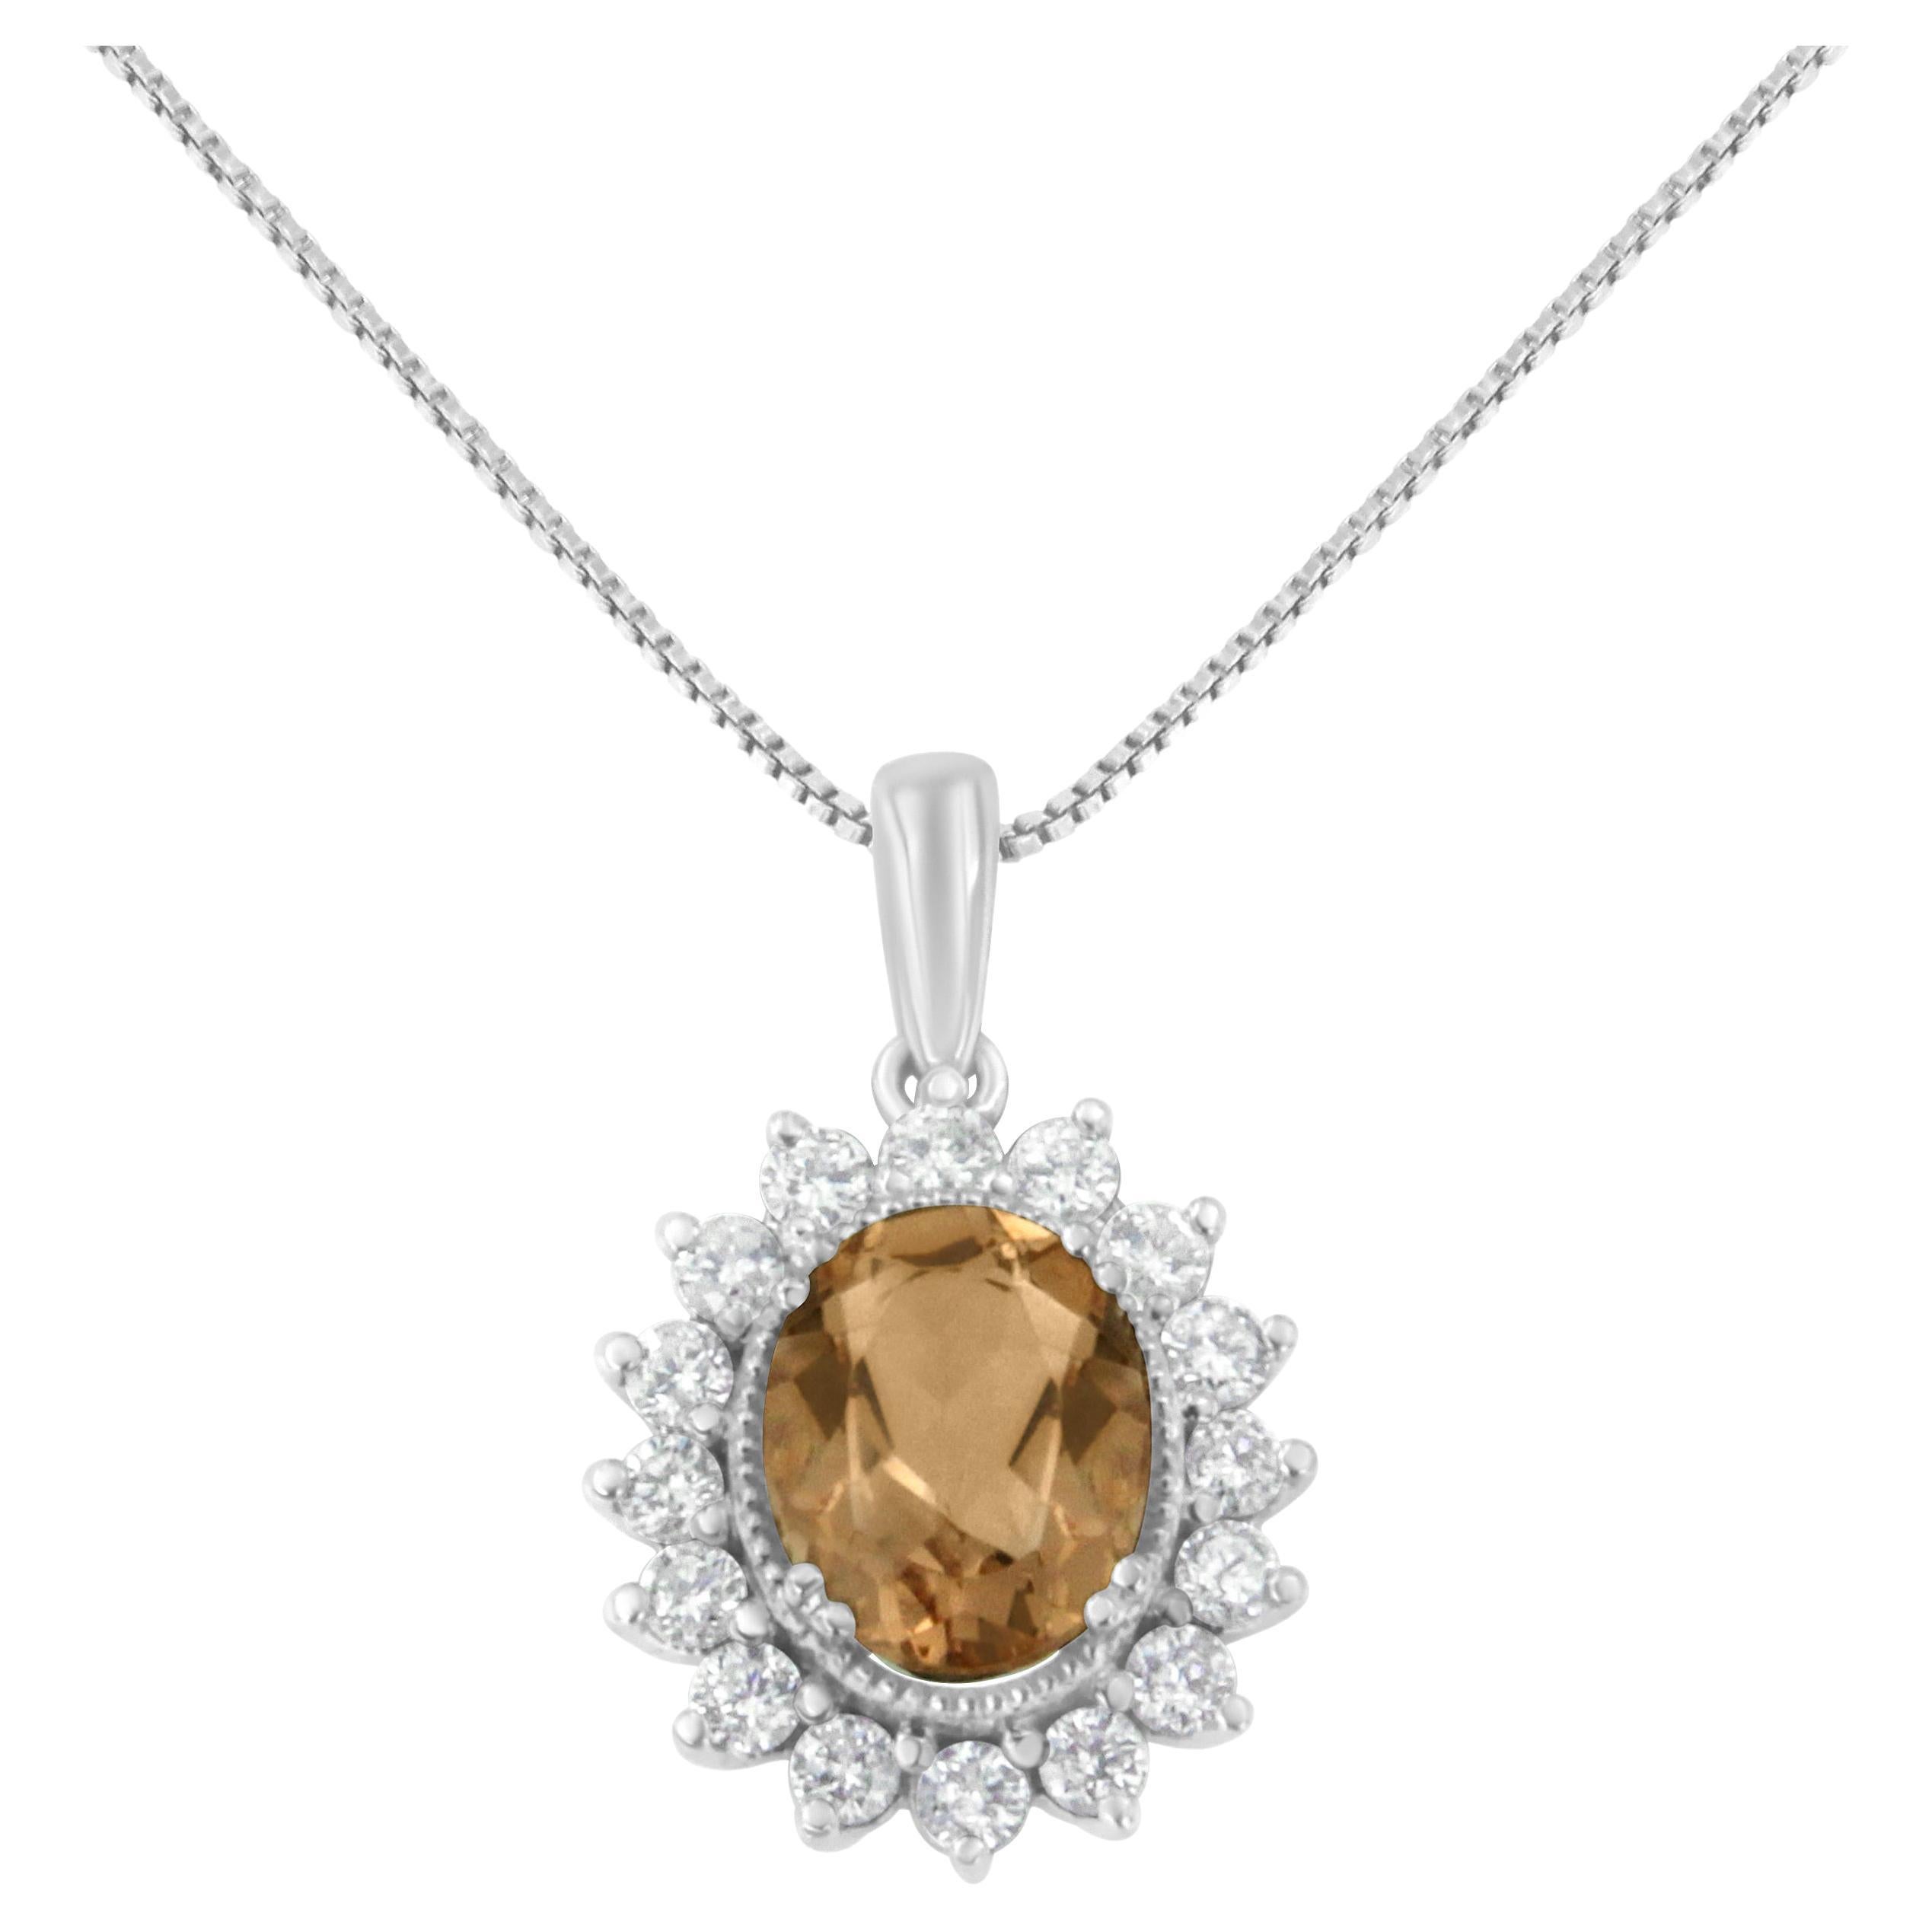 10K White Gold 1/2 Cttw Diamond and Morganite Gemstone Oval Pendant Necklace